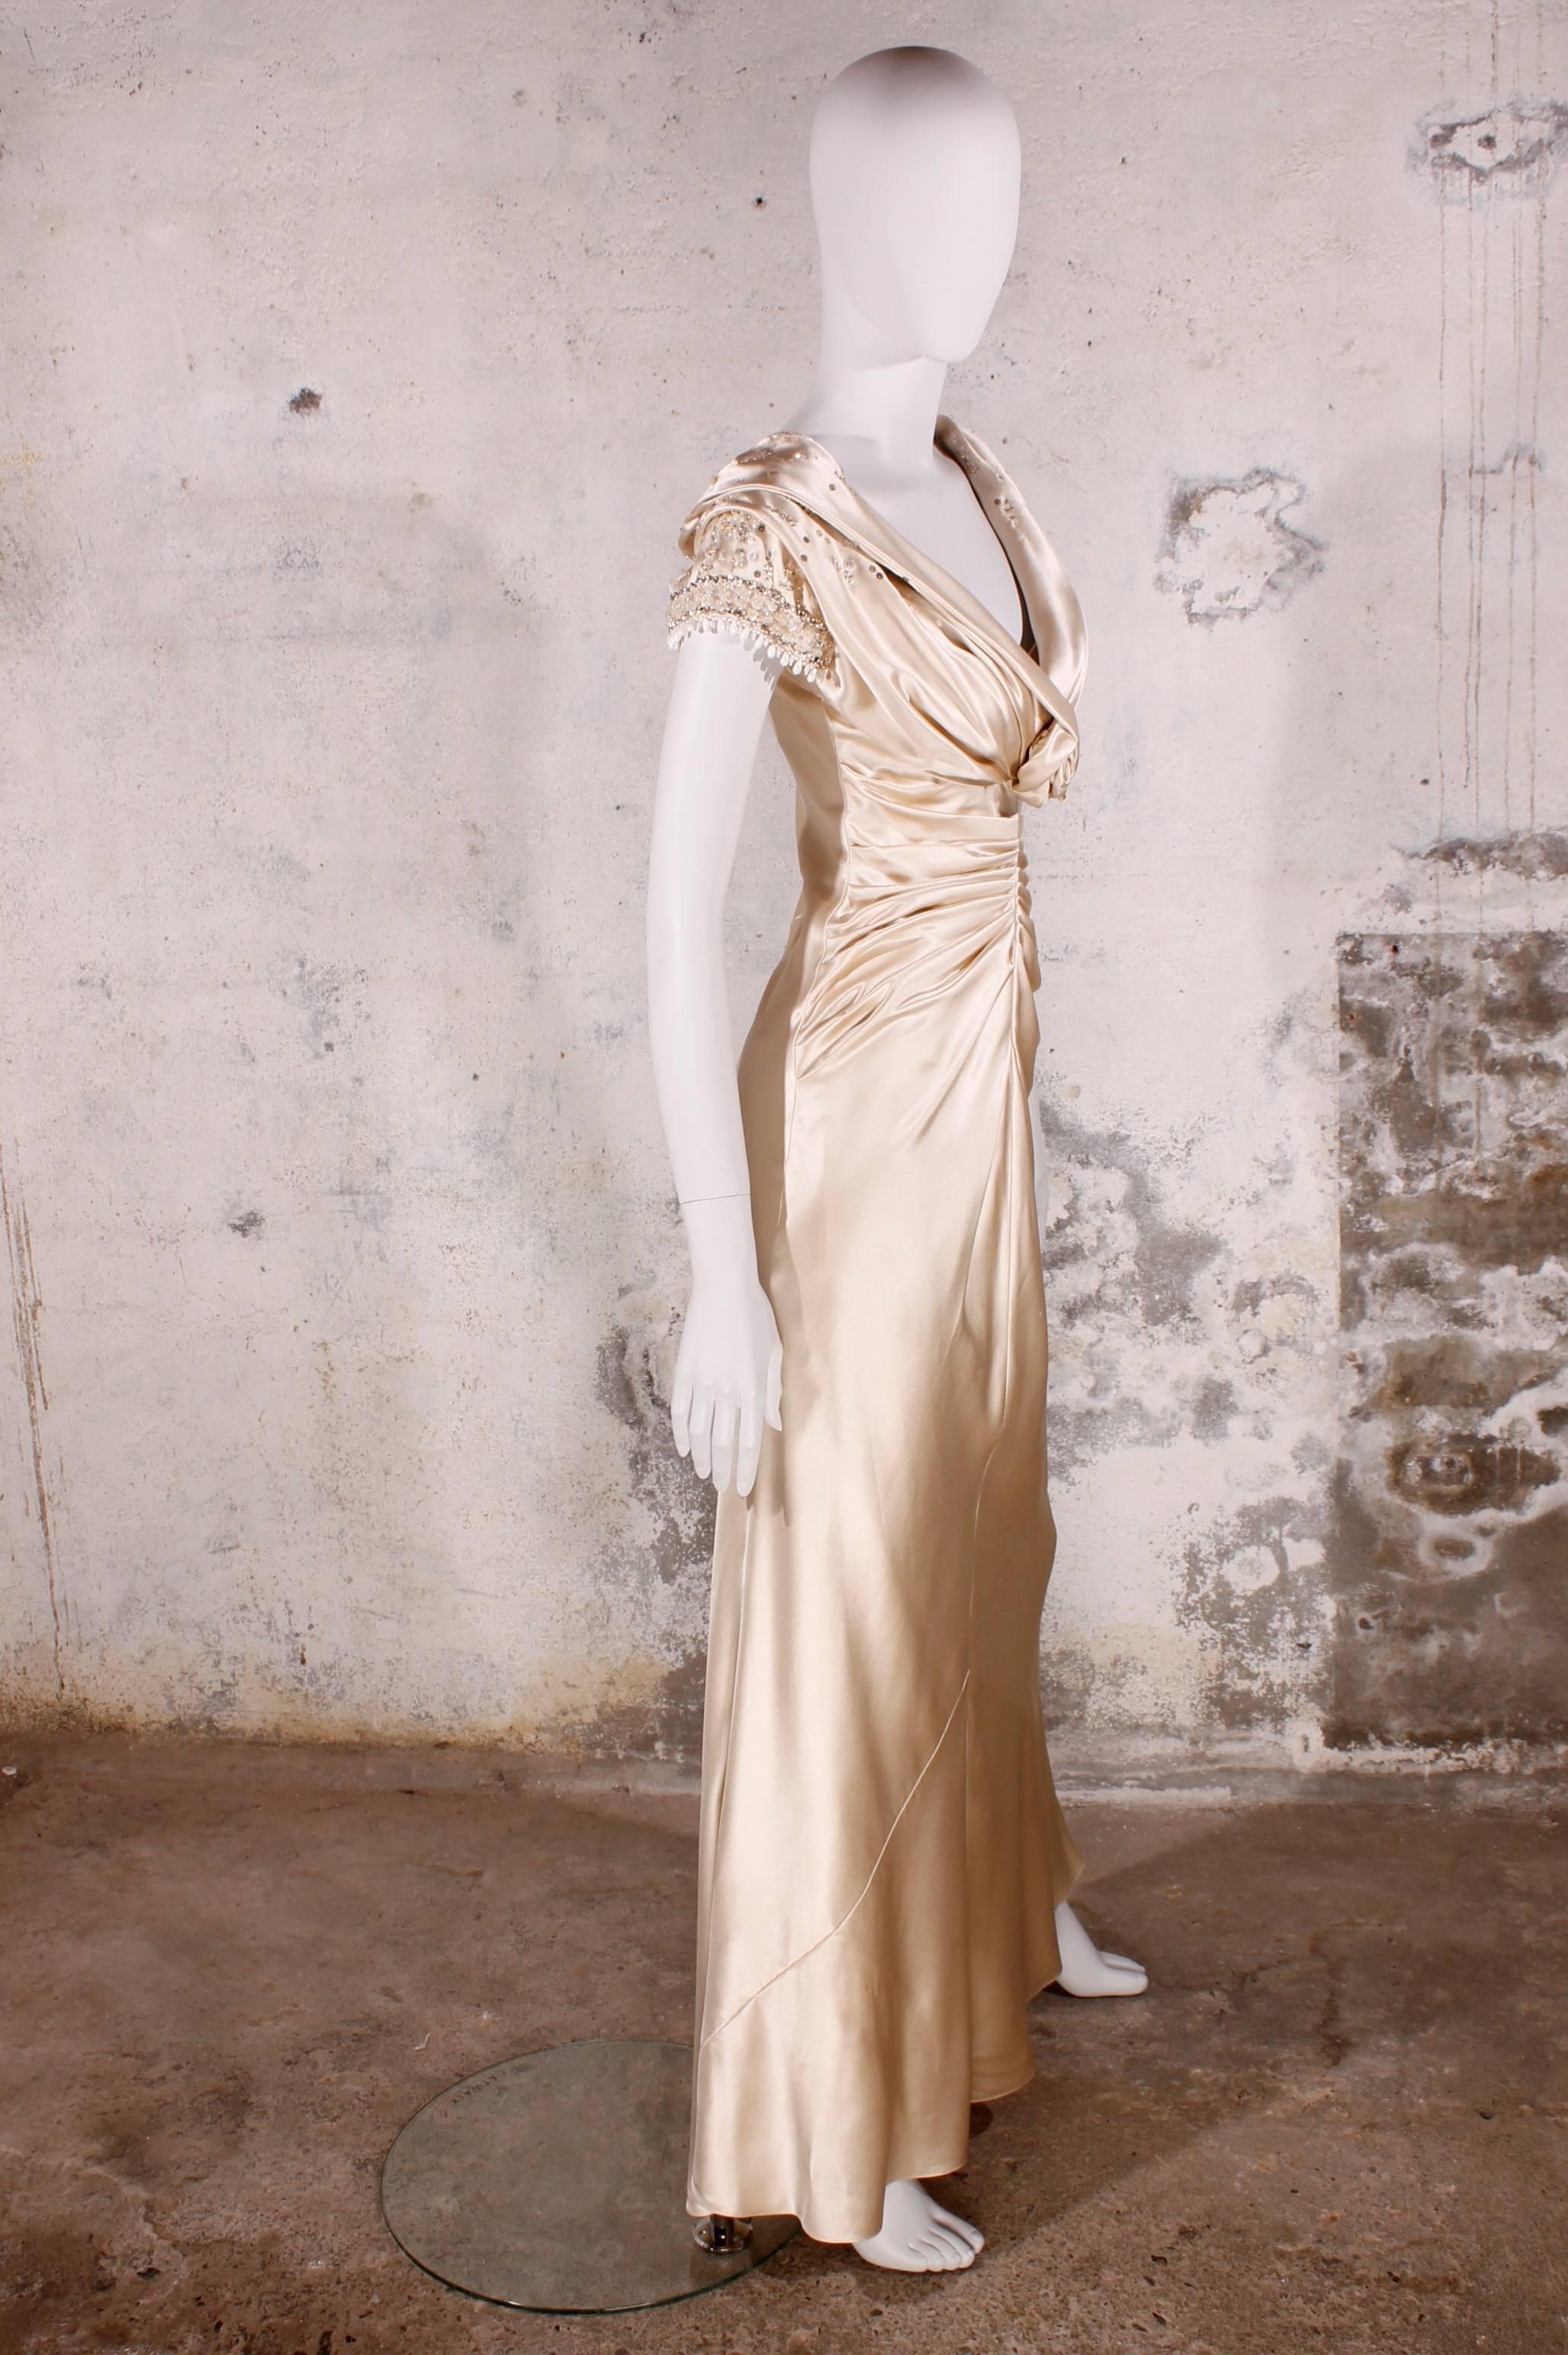 Long and very elegant evening gown of Christian Dior in a beautiful shiny champagne color. The dress is bias grain cut and a tiny bit longer at the back.
It has sequins, crystals, beads and pearls on the short sleeves and the waterfall collar on